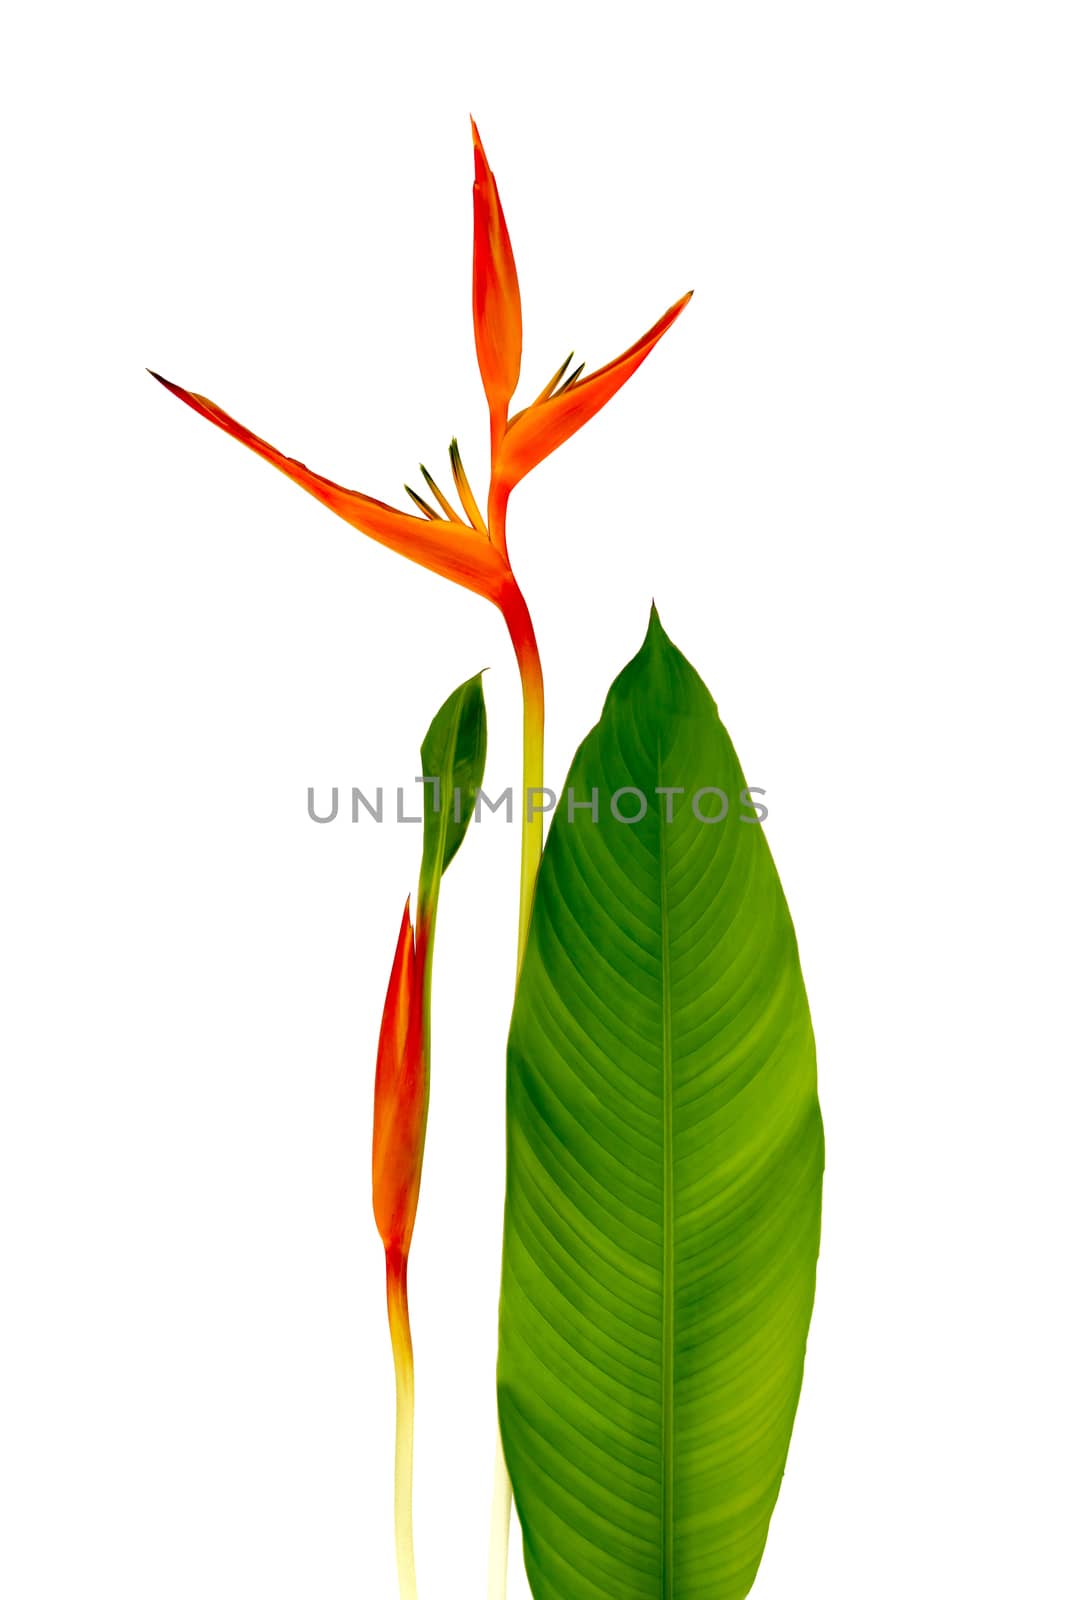 Beautiful Red, Yellow And Orange Heliconia (Heliconia Spp.) Flower Isolated On White Background, Tropical Vivid Color Flower On White Background, Heliconia Or Bird Of Paradise Flower by rakoptonLPN